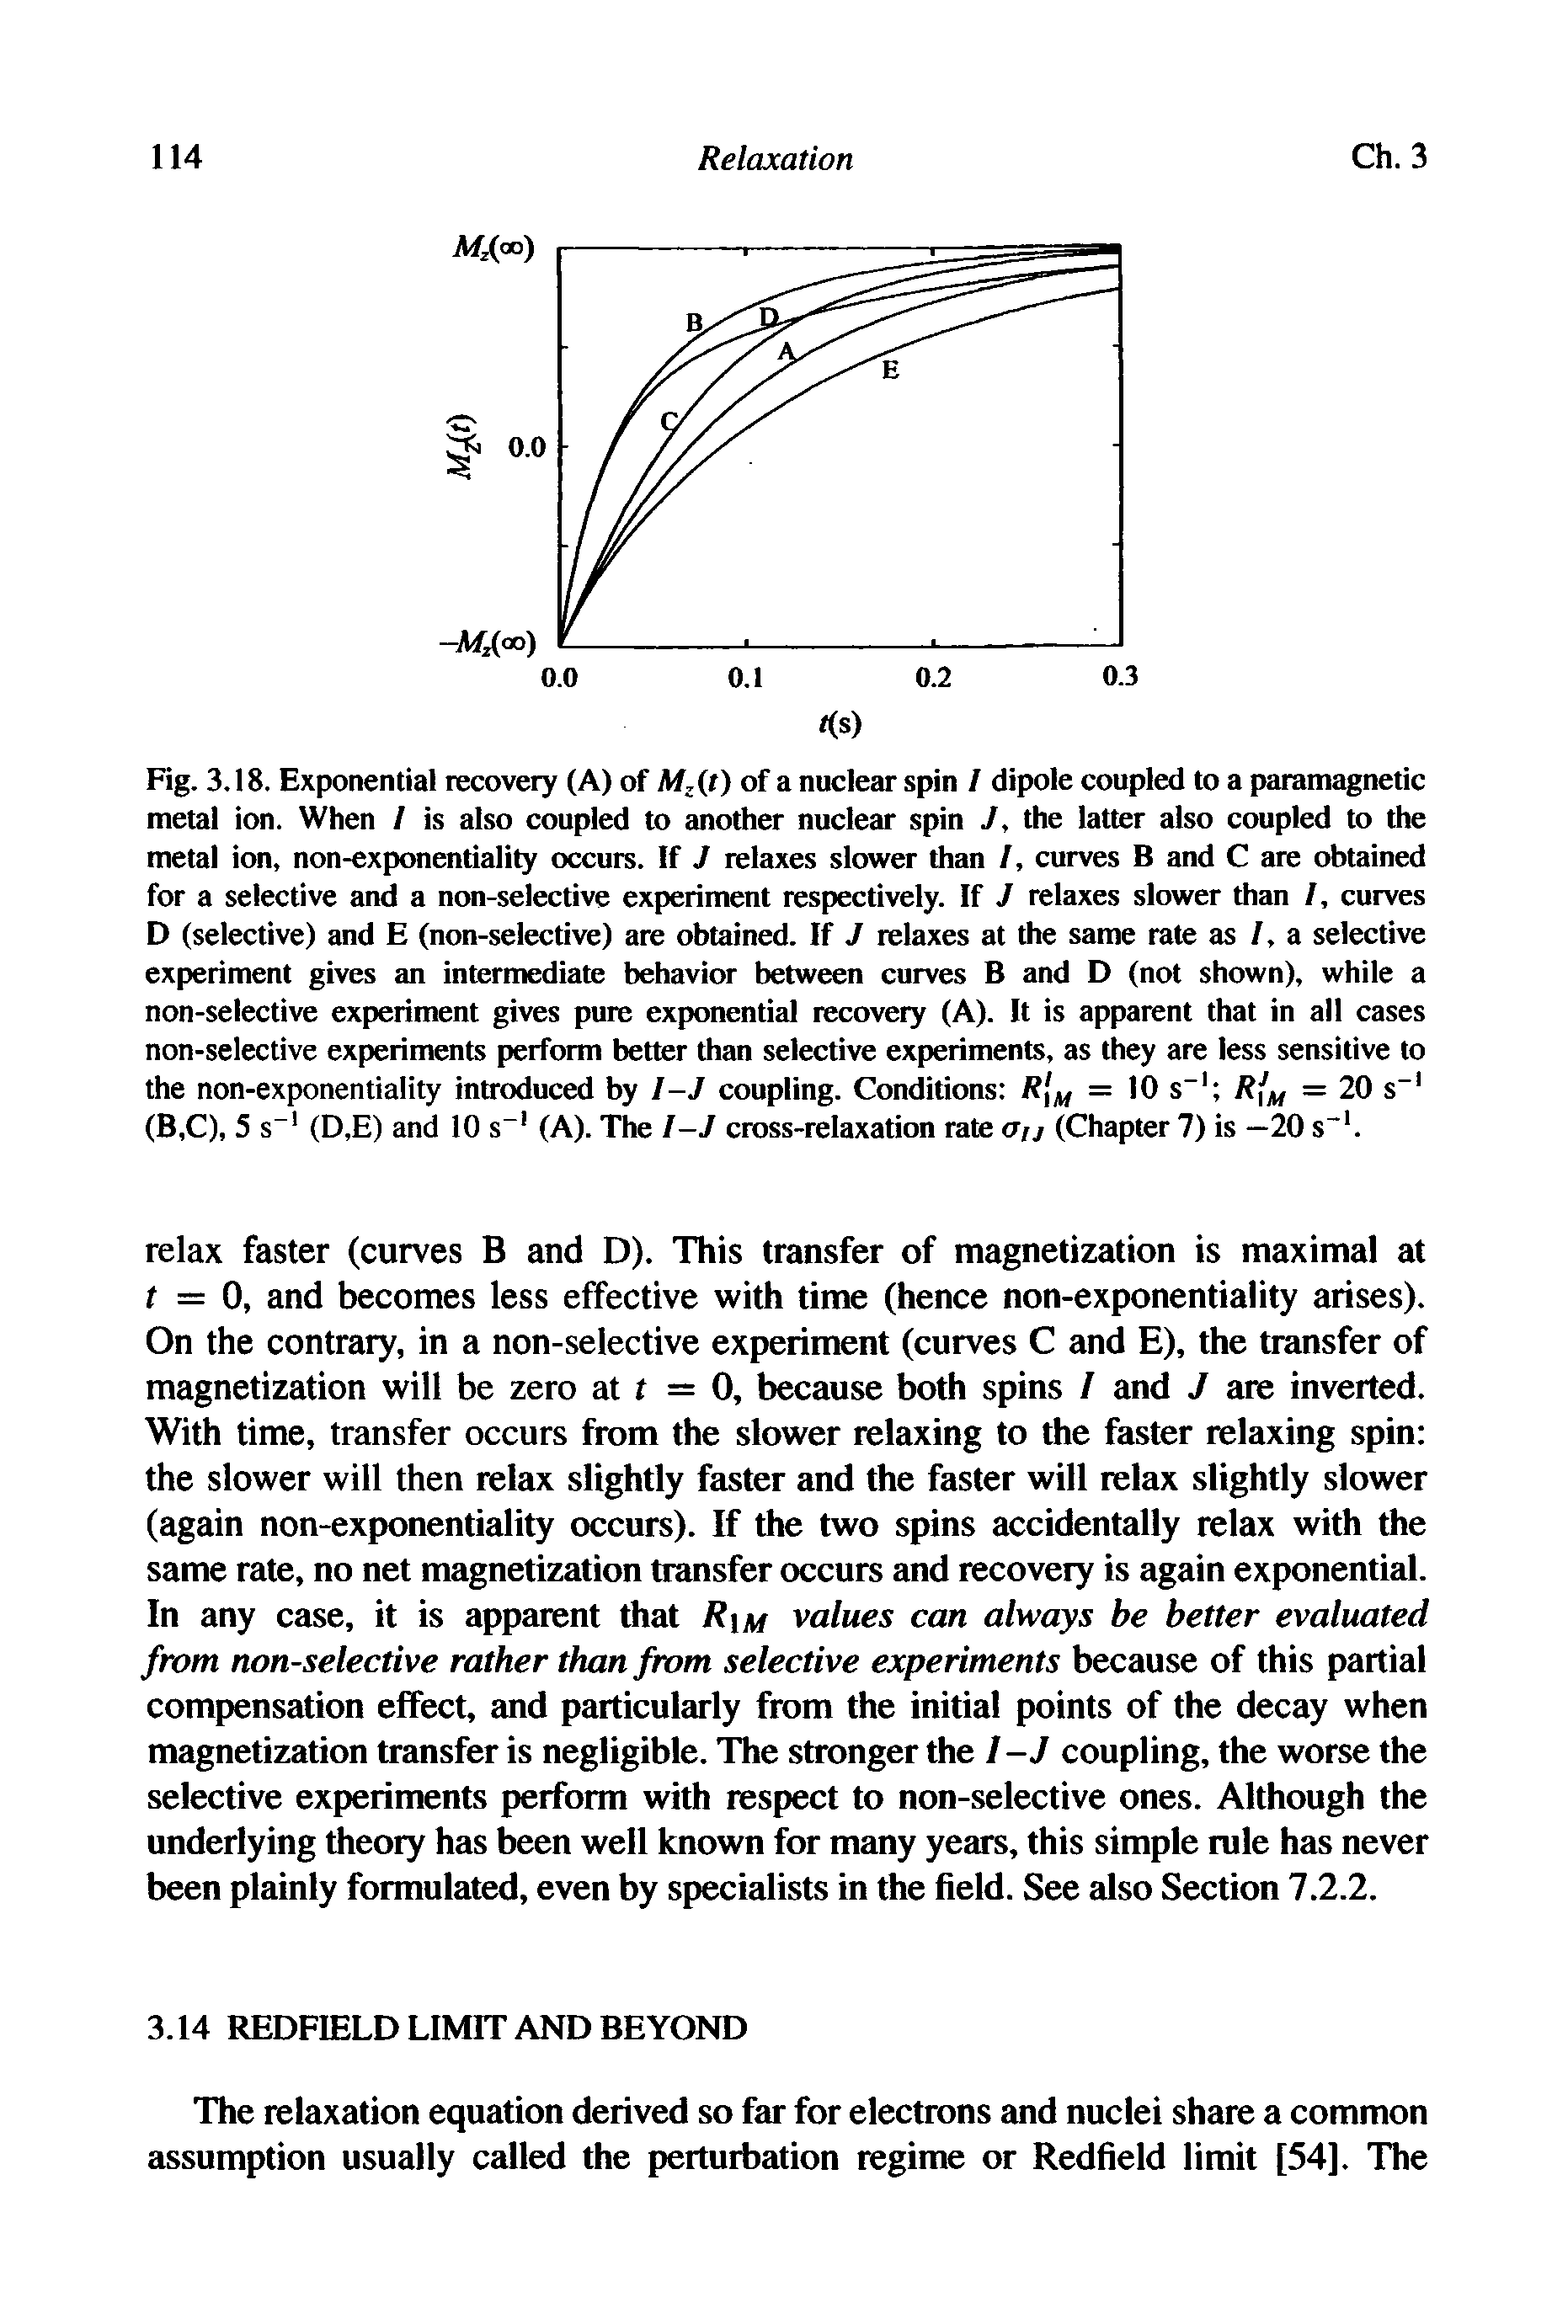 Fig. 3.18. Exponential recovery (A) of Mz(t) of a nuclear spin / dipole coupled to a paramagnetic metal ion. When I is also coupled to another nuclear spin J, the latter also coupled to the metal ion, non-exponentiality occurs. If J relaxes slower than /, curves B and C are obtained for a selective and a non-selective experiment respectively. If J relaxes slower than /, curves D (selective) and E (non-selective) are obtained. If J relaxes at the same rate as /, a selective experiment gives an intermediate behavior between curves B and D (not shown), while a non-selective experiment gives pure exponential recovery (A). It is apparent that in all cases non-selective experiments perform better than selective experiments, as they are less sensitive to the non-exponentiality introduced by I-J coupling. Conditions R m = 10 s l R M = 20 s l (B,C), 5 s l (D,E) and 10 s l (A). The I-J cross-relaxation rate ou (Chapter 7) is —20 s"1.